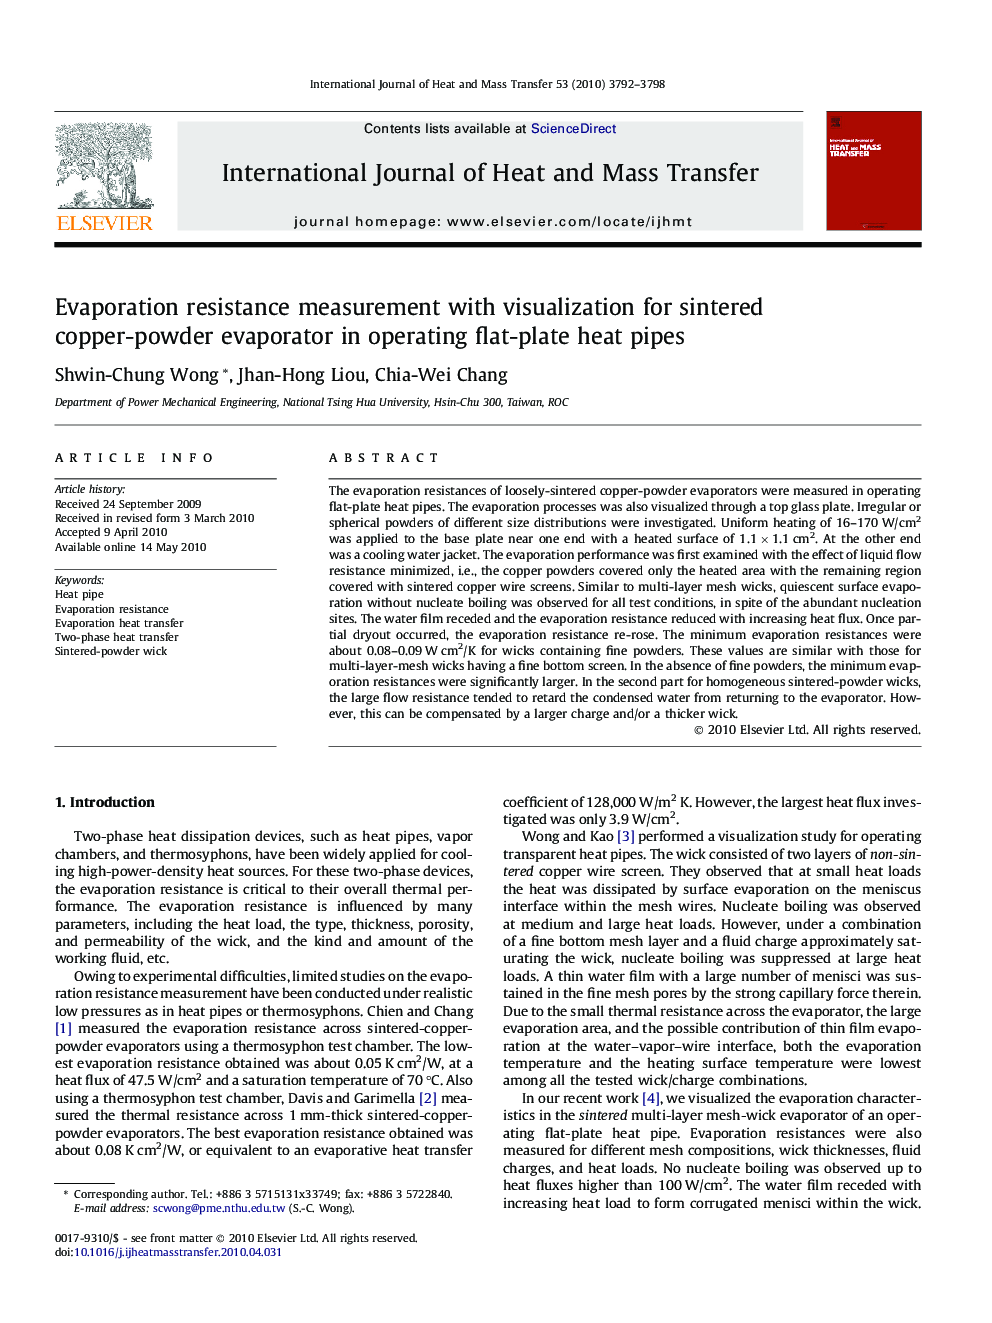 Evaporation resistance measurement with visualization for sintered copper-powder evaporator in operating flat-plate heat pipes